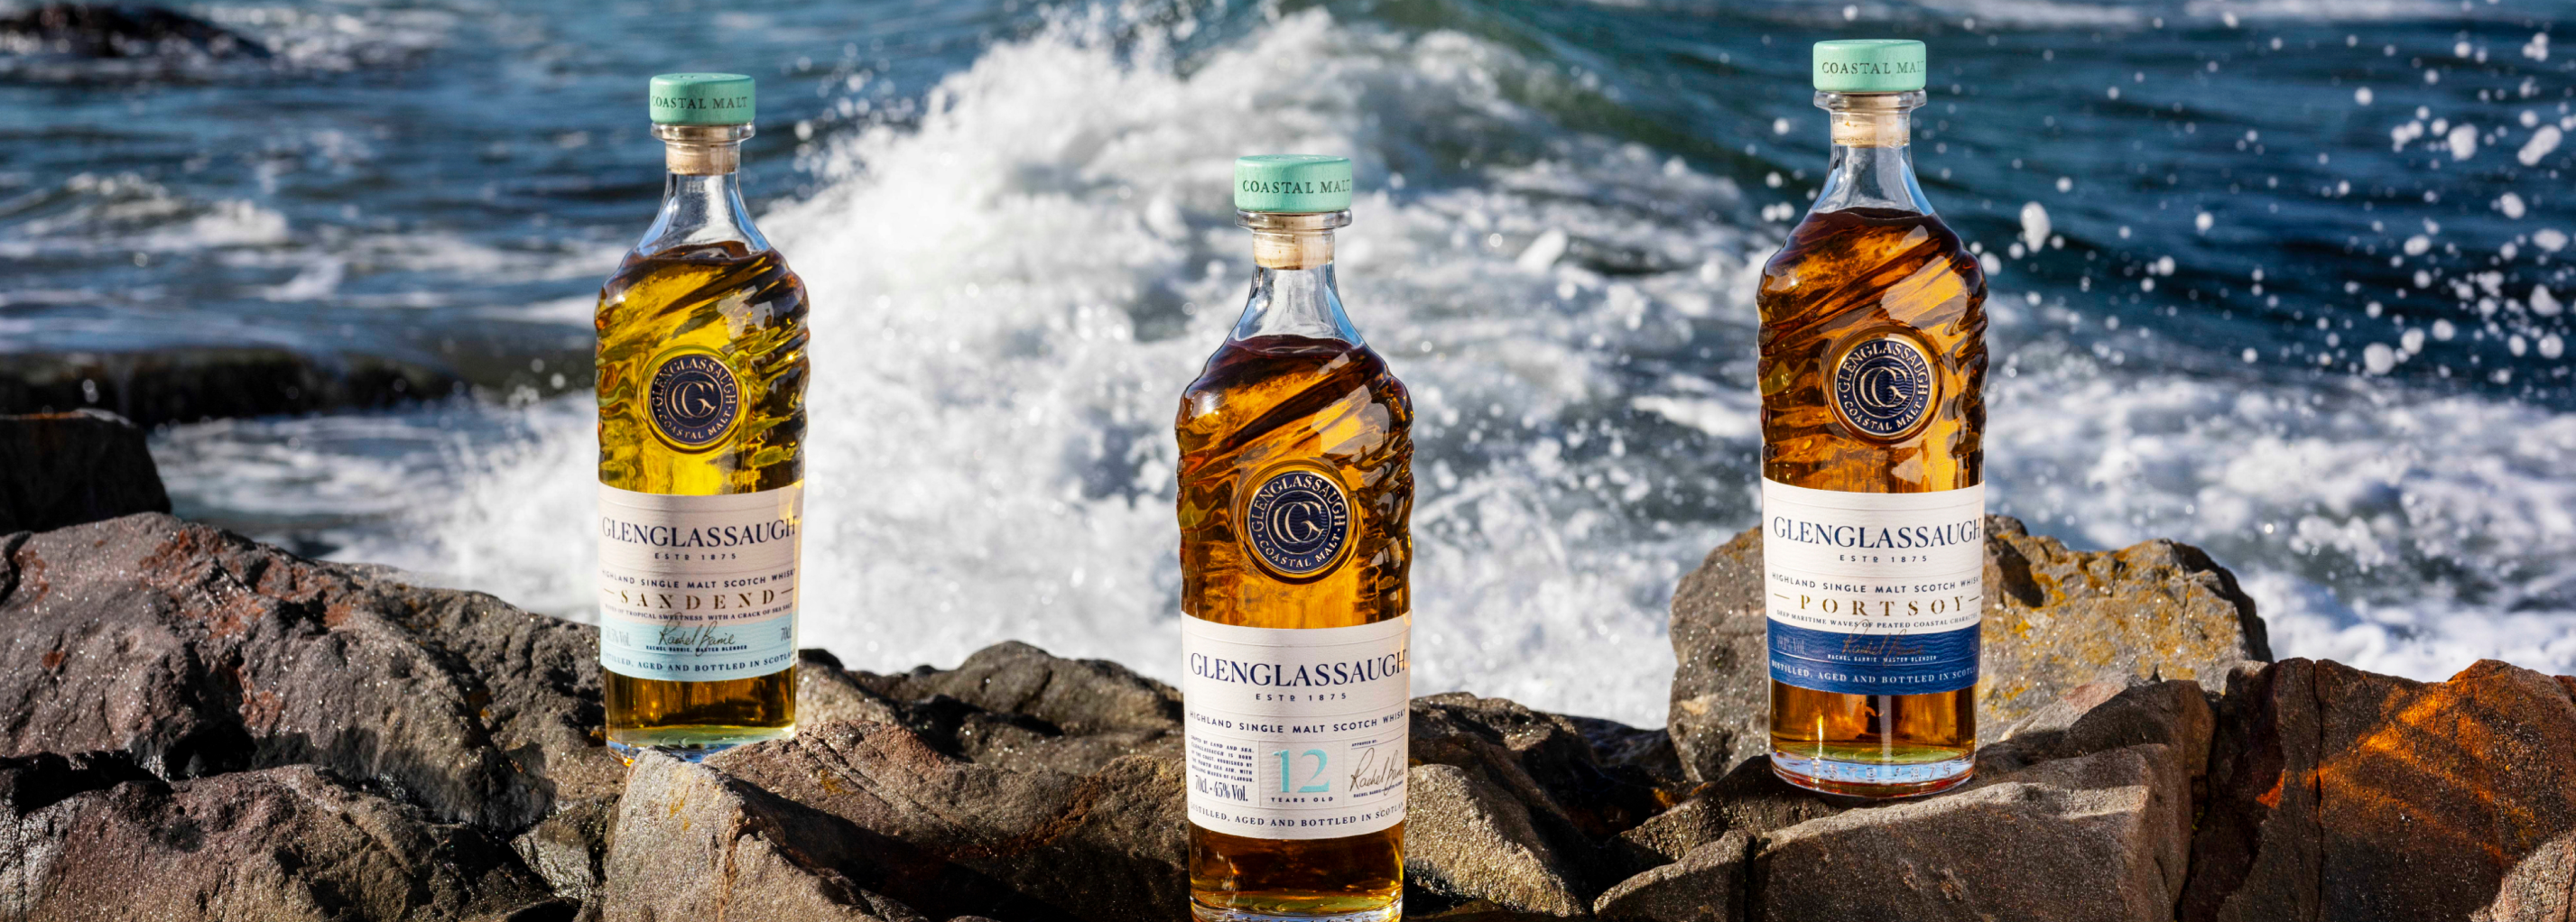 Glenglassaugh Sandend named Whisky of the Year 2023 - The Shout